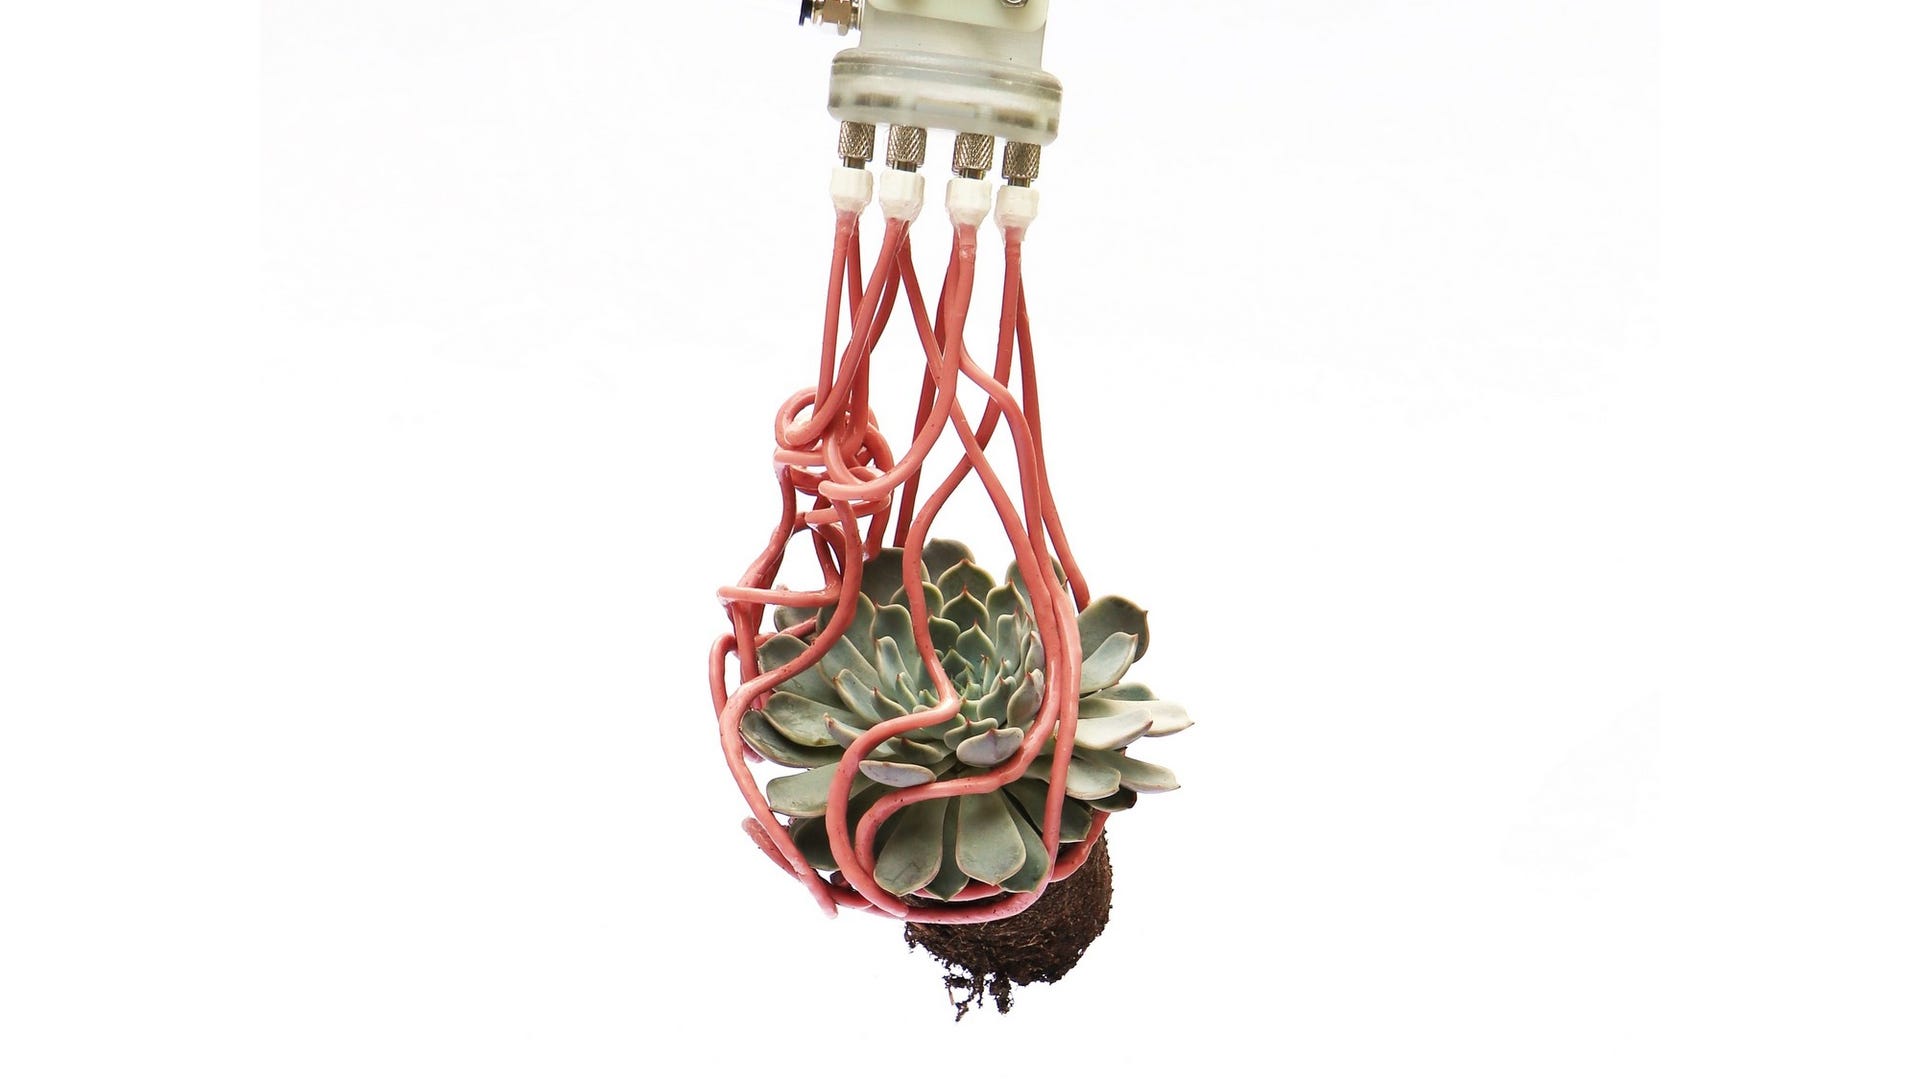 Pinkish robo tentacles entangle a small grey-green succulent with exposed dirt and roots.